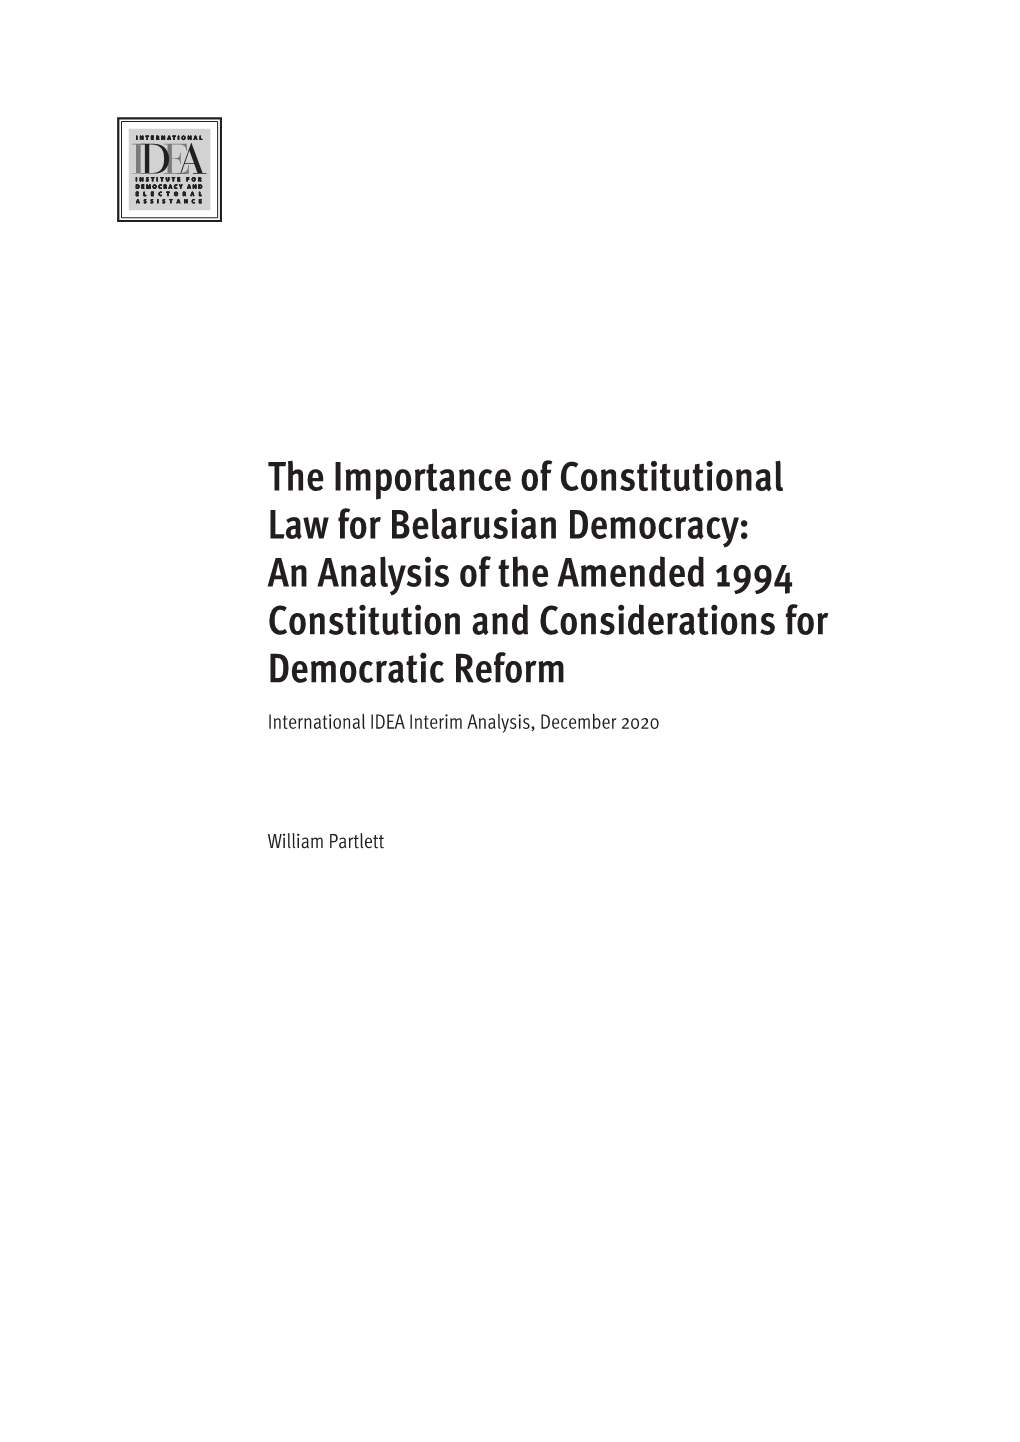 The Importance of Constitutional Law for Belarusian Democracy: an Analysis of the Amended 1994 Constitution and Considerations for Democratic Reform